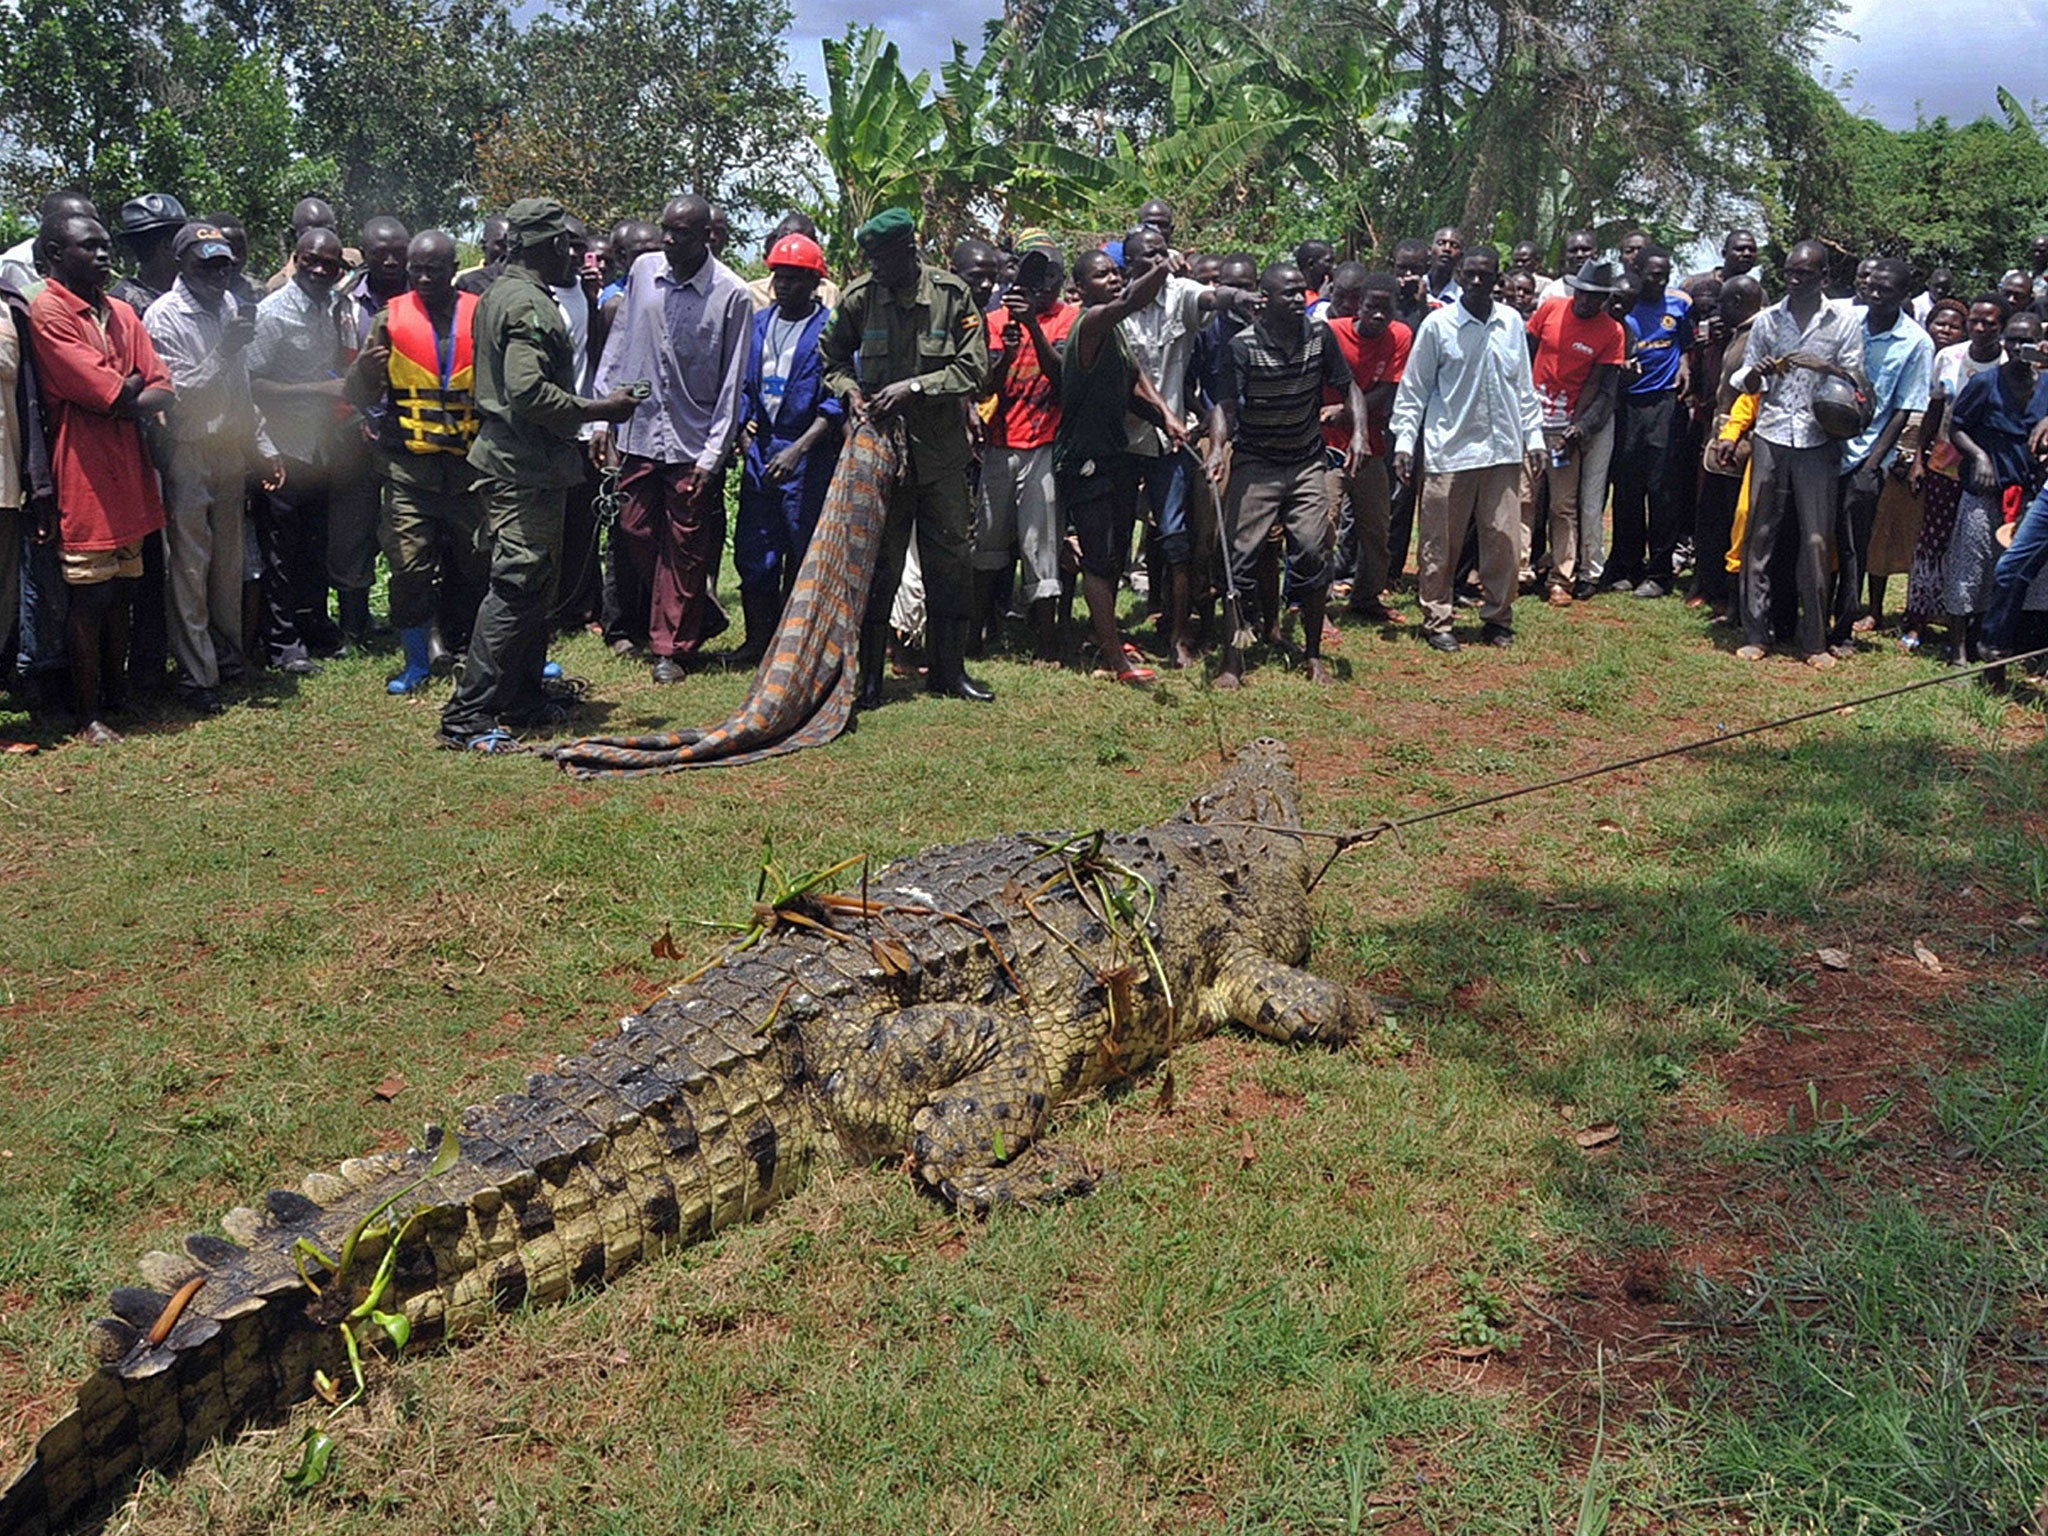 This picture taken on March 31, 2014 shows residents of the Kakira village, in the Jinja District of eastern Uganda, gathering to look at a crocodile after it was captured by Uganda Wildlife Authority (UWA) staff. 